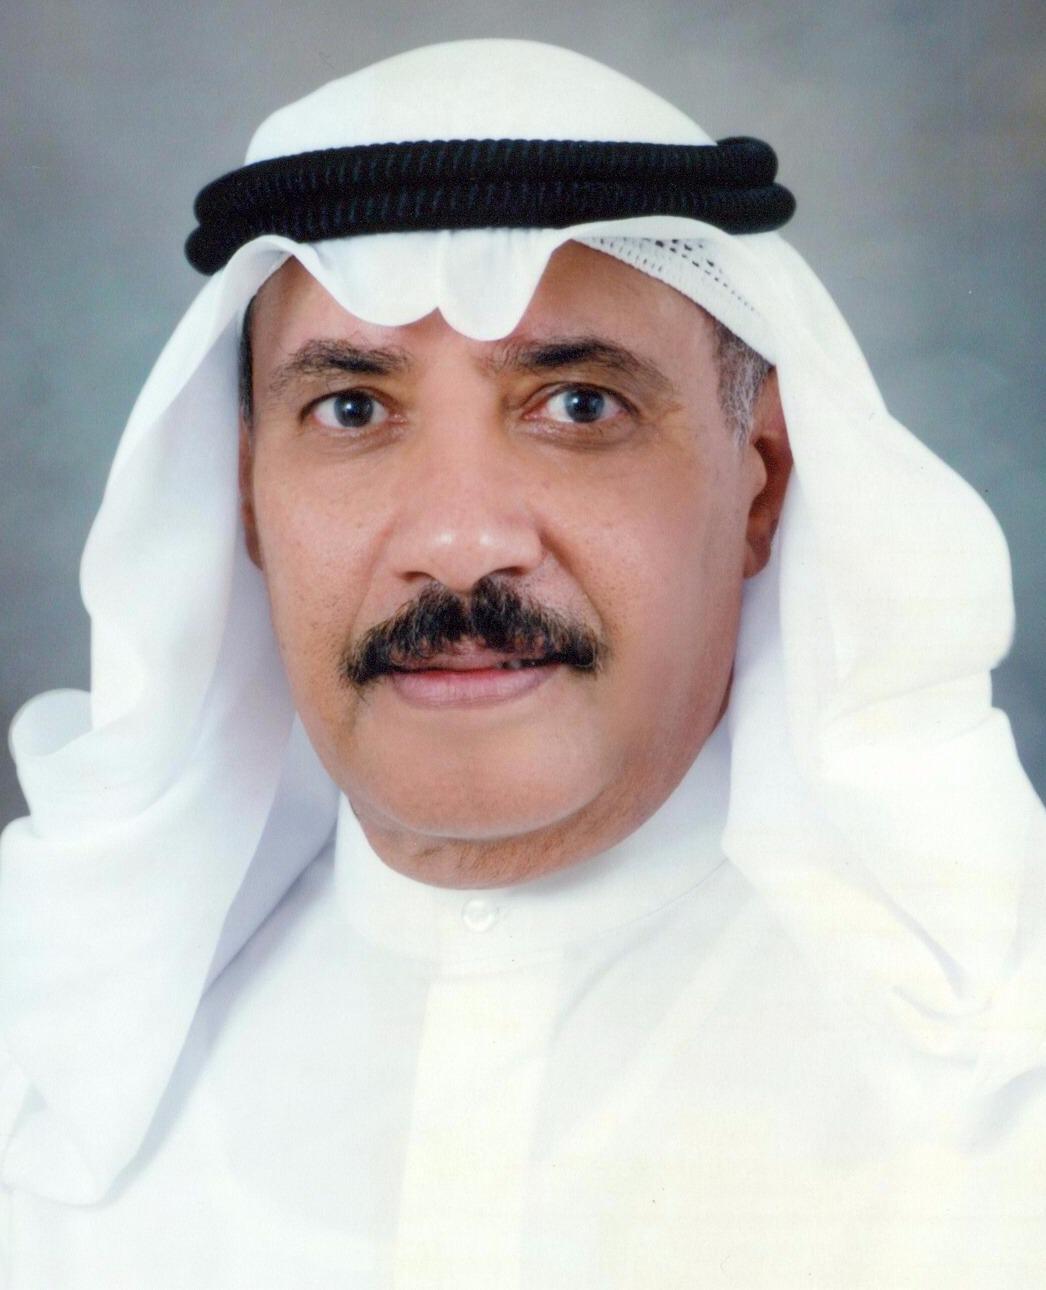 Vice President of MILSET Asia and head of its regional office for Asia, Adnan Al-Meer